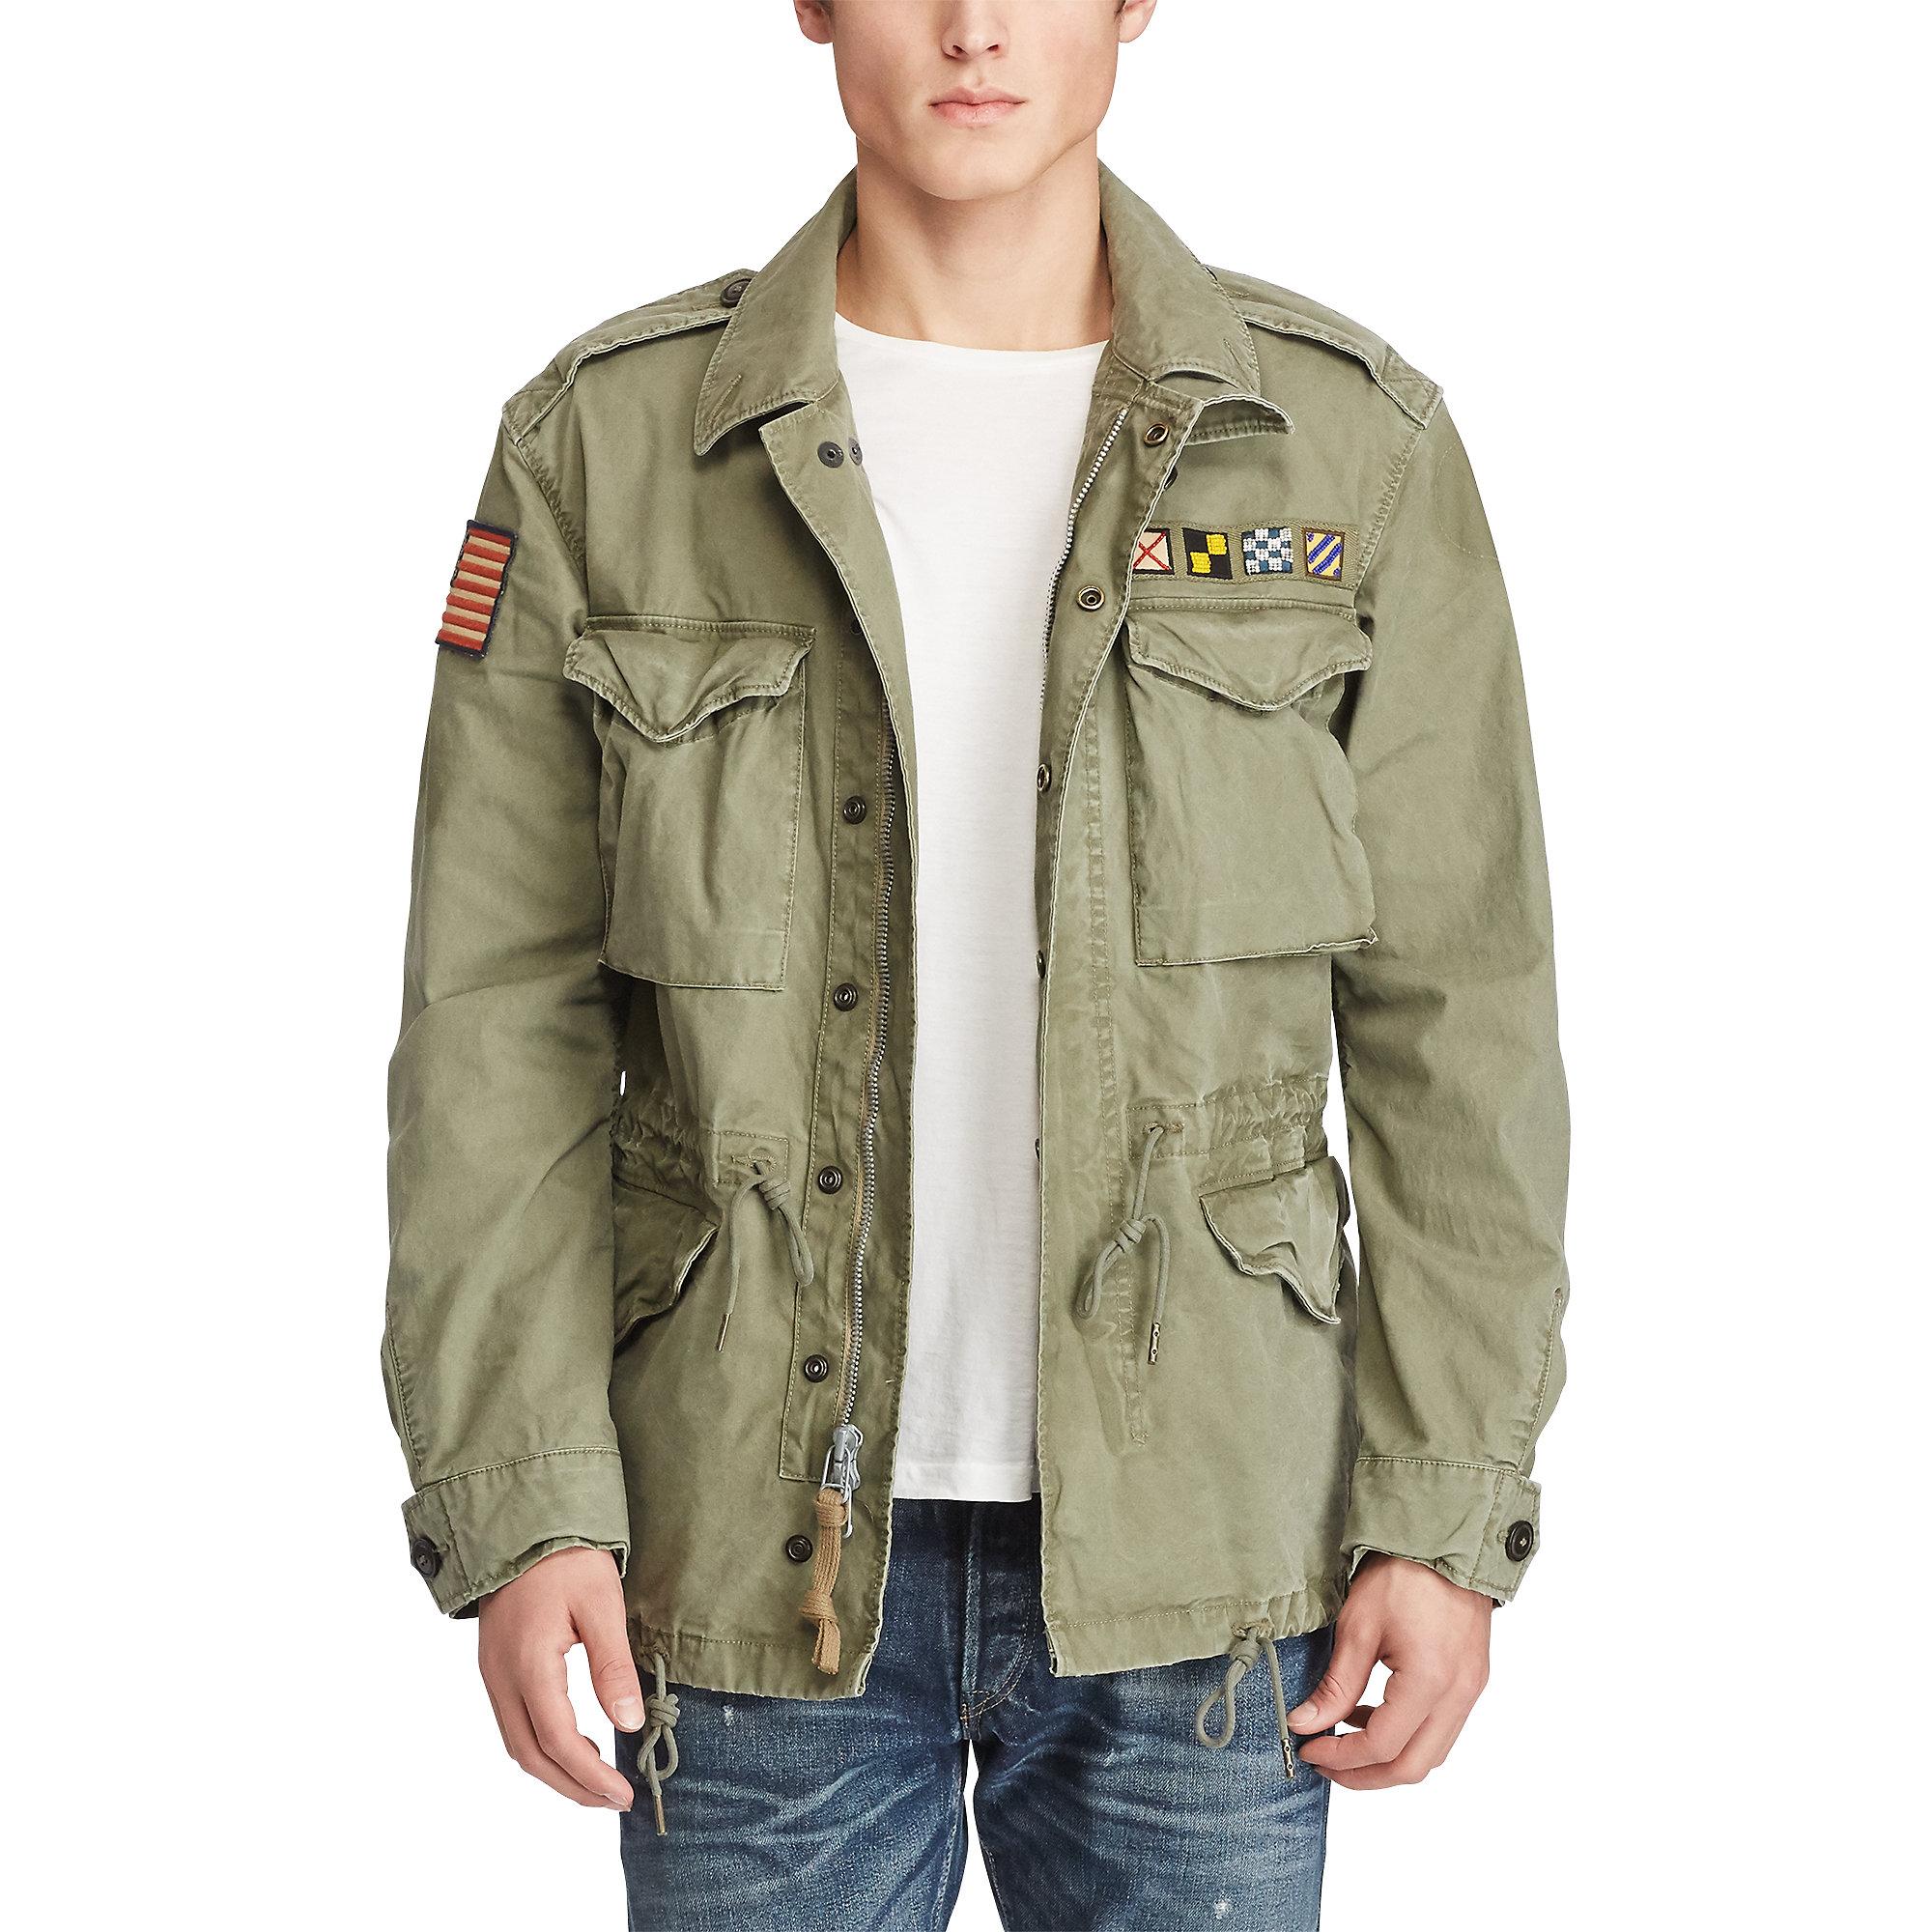 Ralph Lauren Army Jacket - Army Military